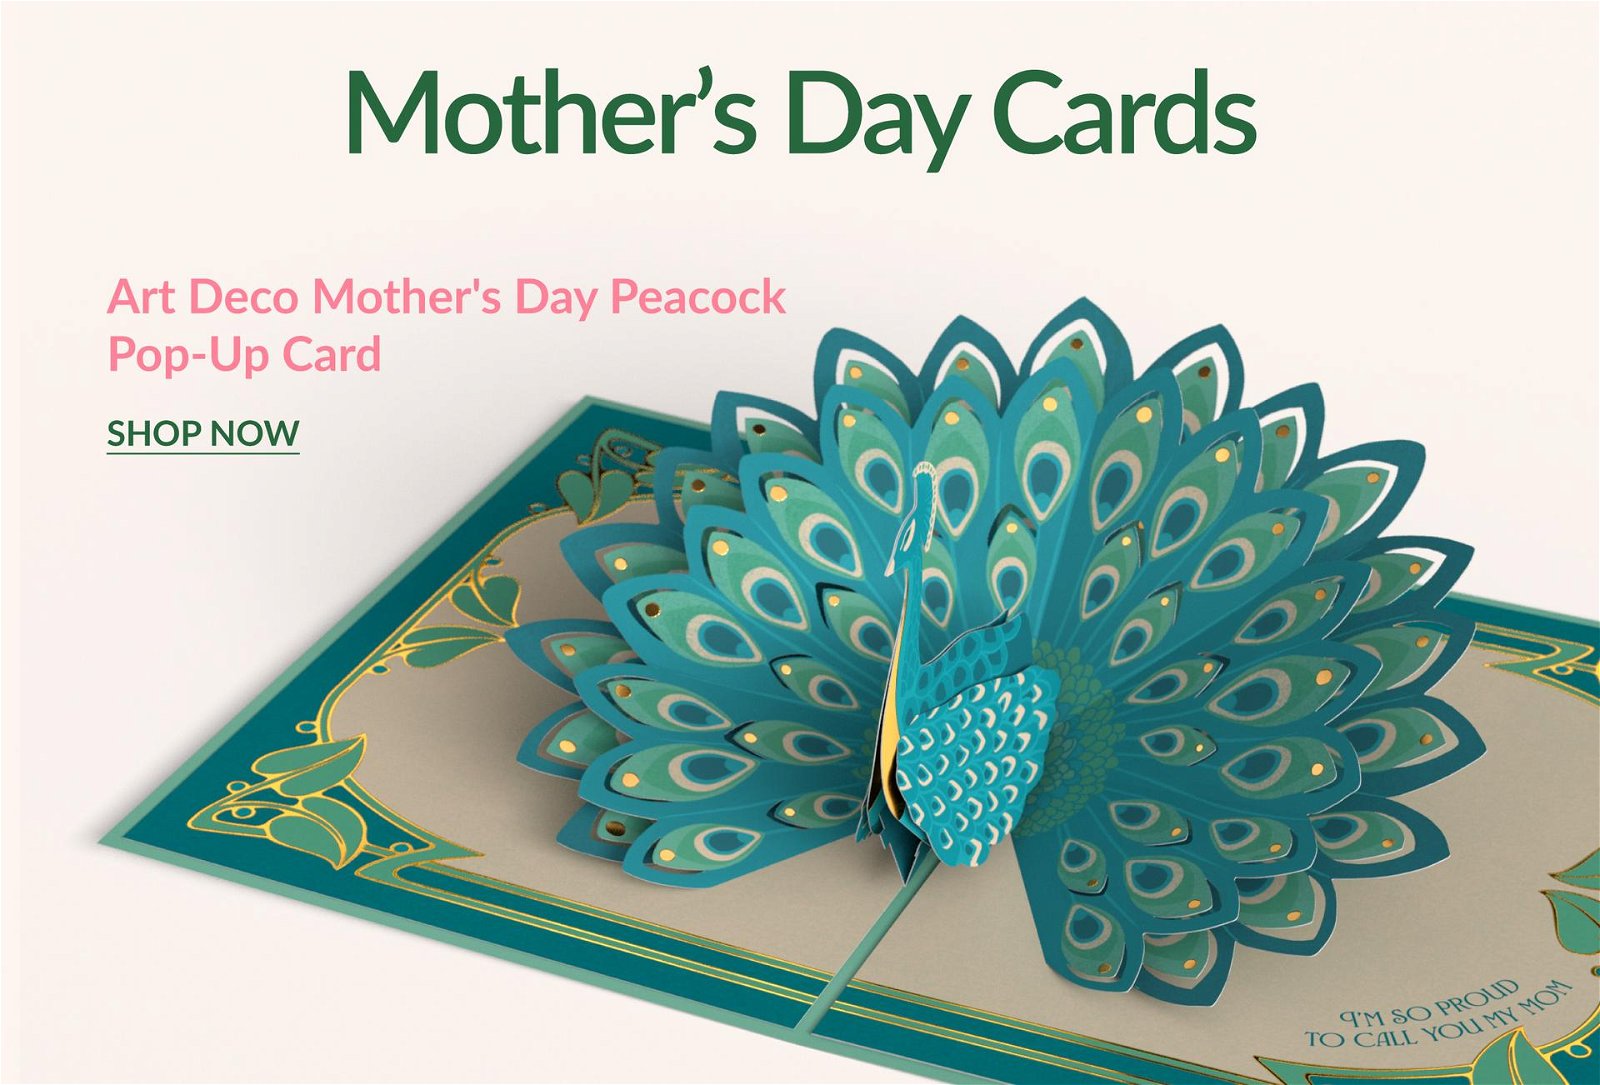 Mother’s Day Cards | Art Deco Mother’s Day Peacock Pop-Up Card | SHOP NOW